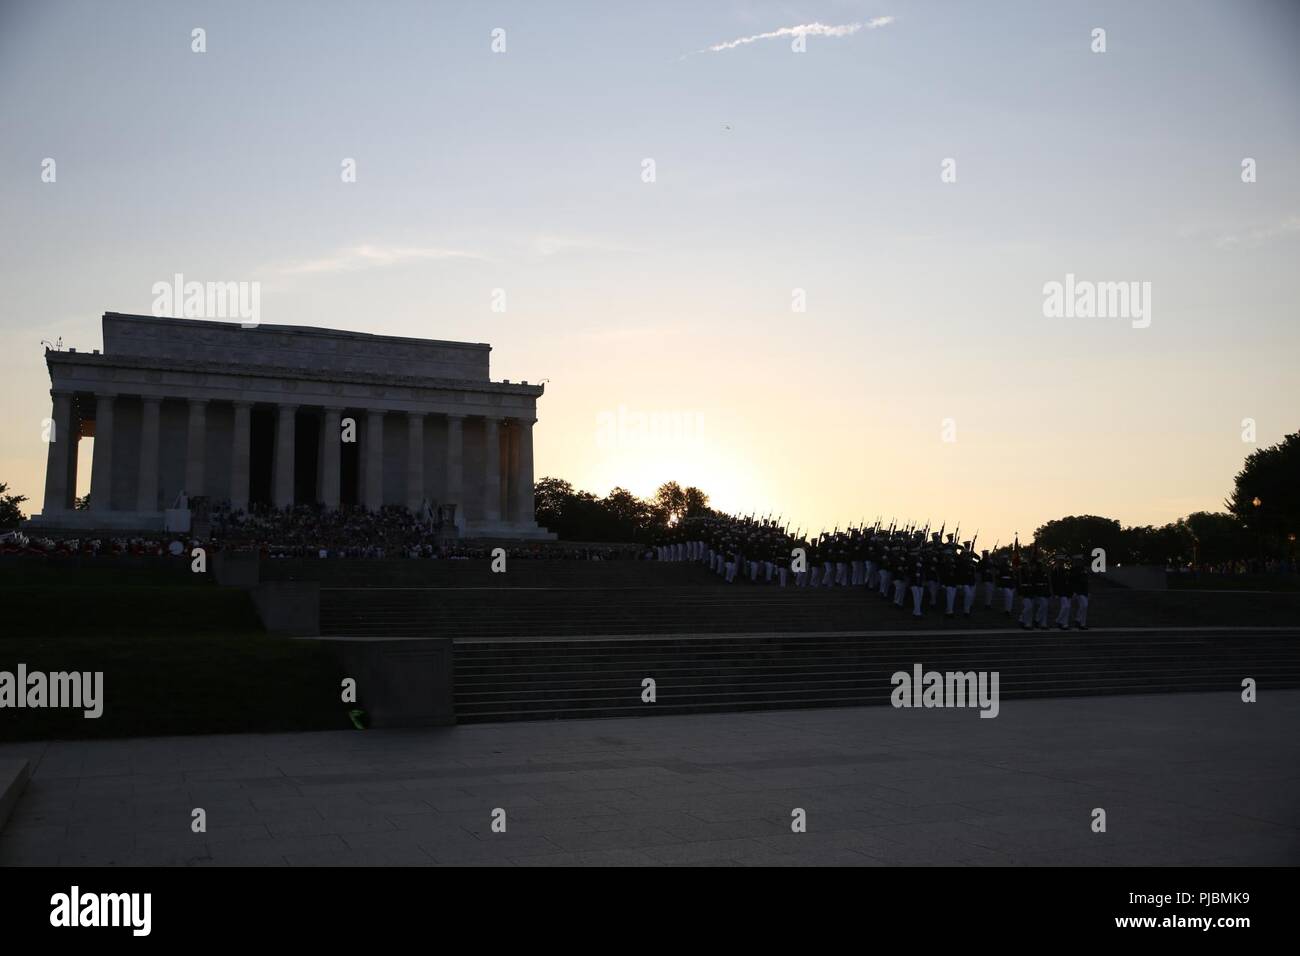 Alpha and Bravo marching companies with Marine Barracks Washington D.C., march off the parade deck at the conclusion of a Tuesday Sunset Parade at the Lincoln Memorial, Washington D.C., July 10, 2018. The guest of honor for the parade was the former Vice President of the U.S., Joe Biden, and the hosting official was the Staff Judge Advocate to the Commandant of the Marine Corps, Maj. Gen. John R. Ewers Jr. Stock Photo